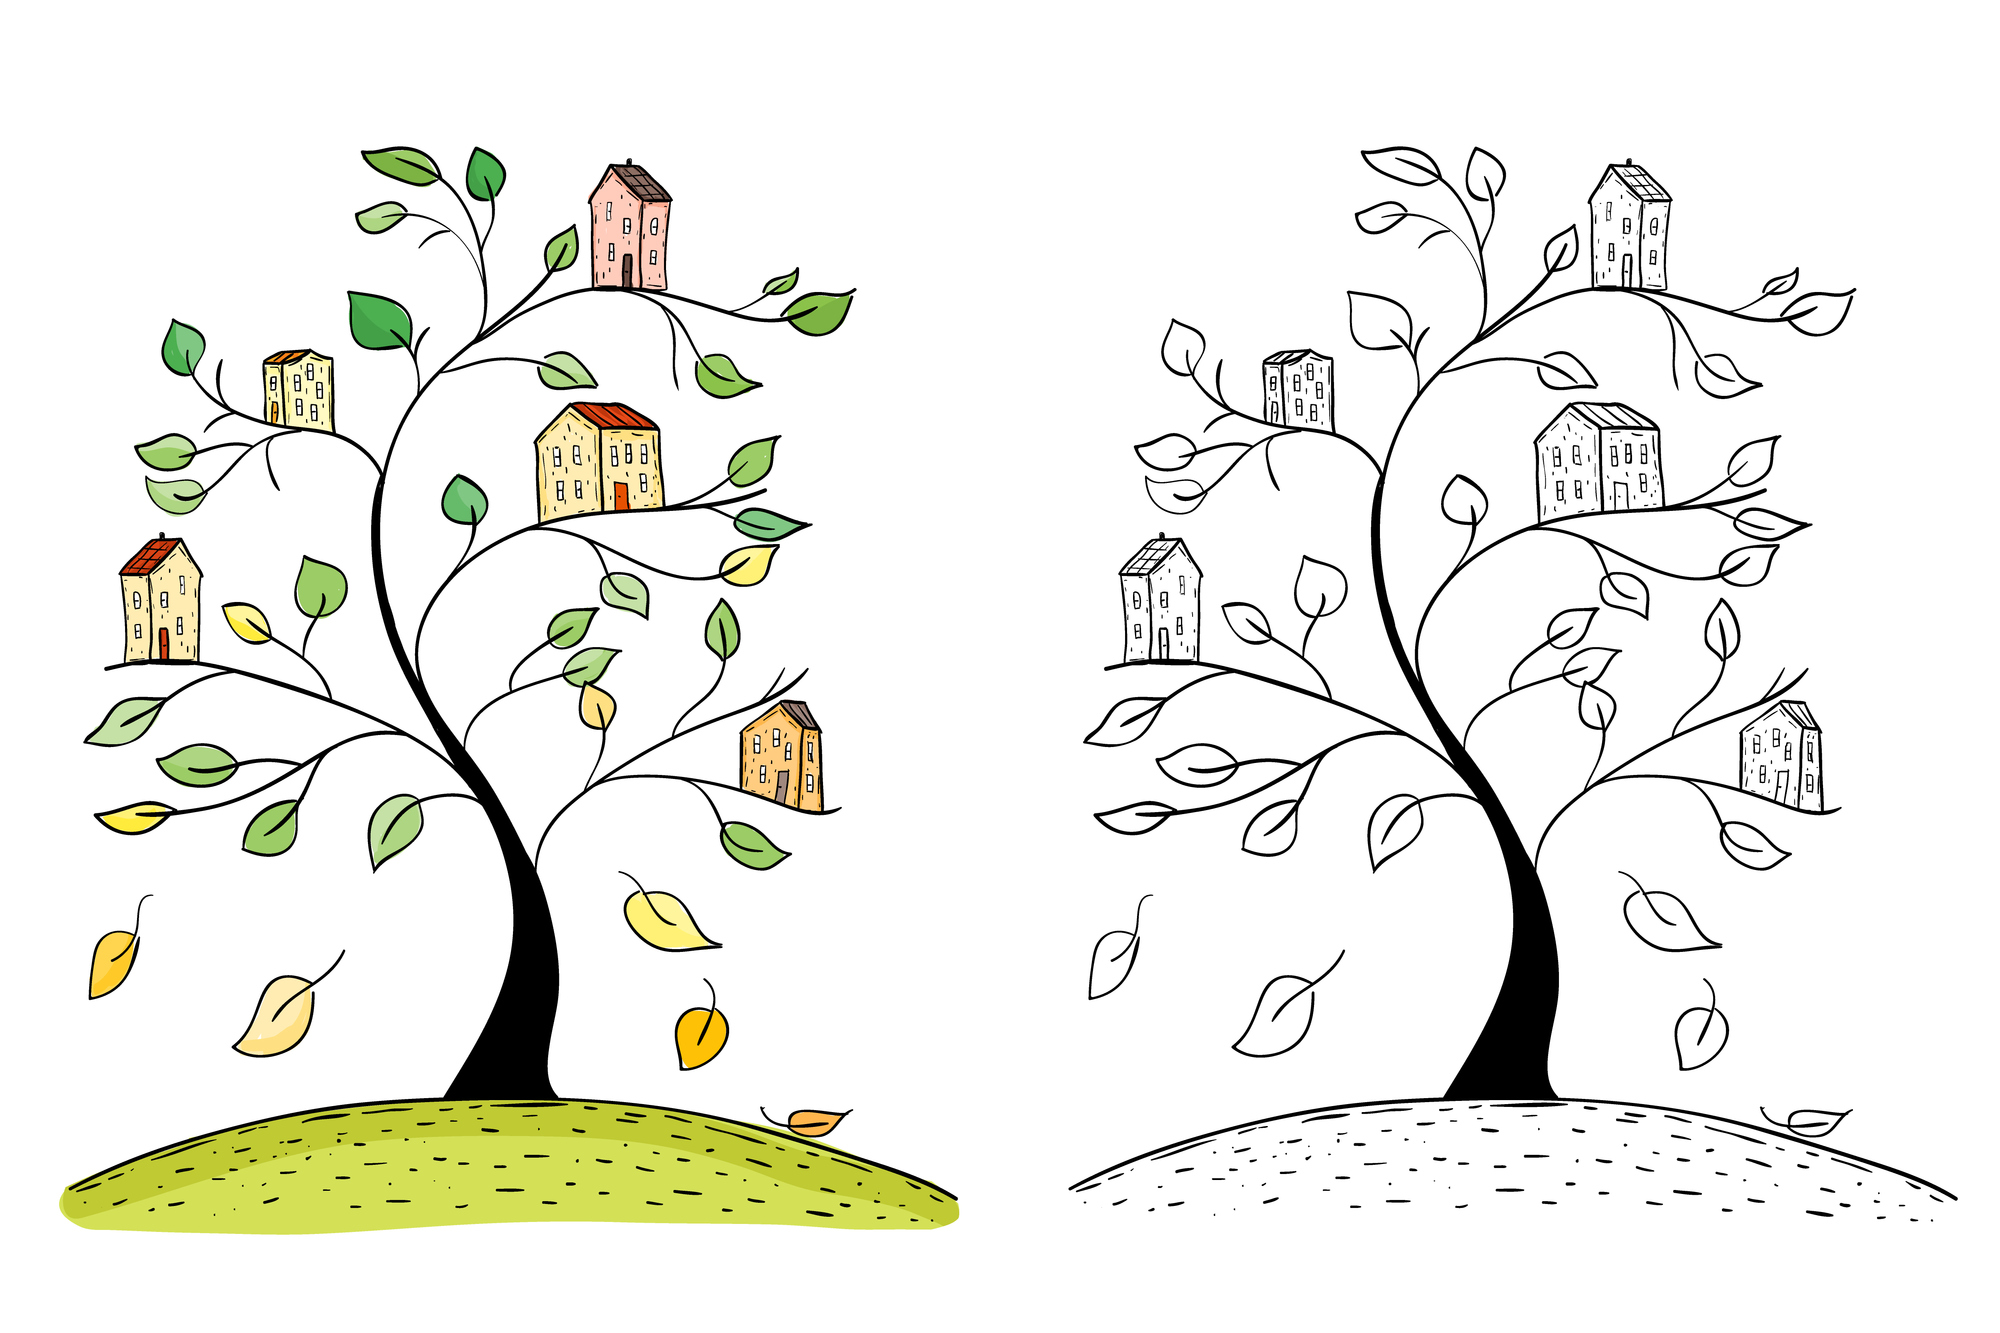 Illustration of doodle houses on tree. Drawing of village on tree branches. Hand drawn sketch.